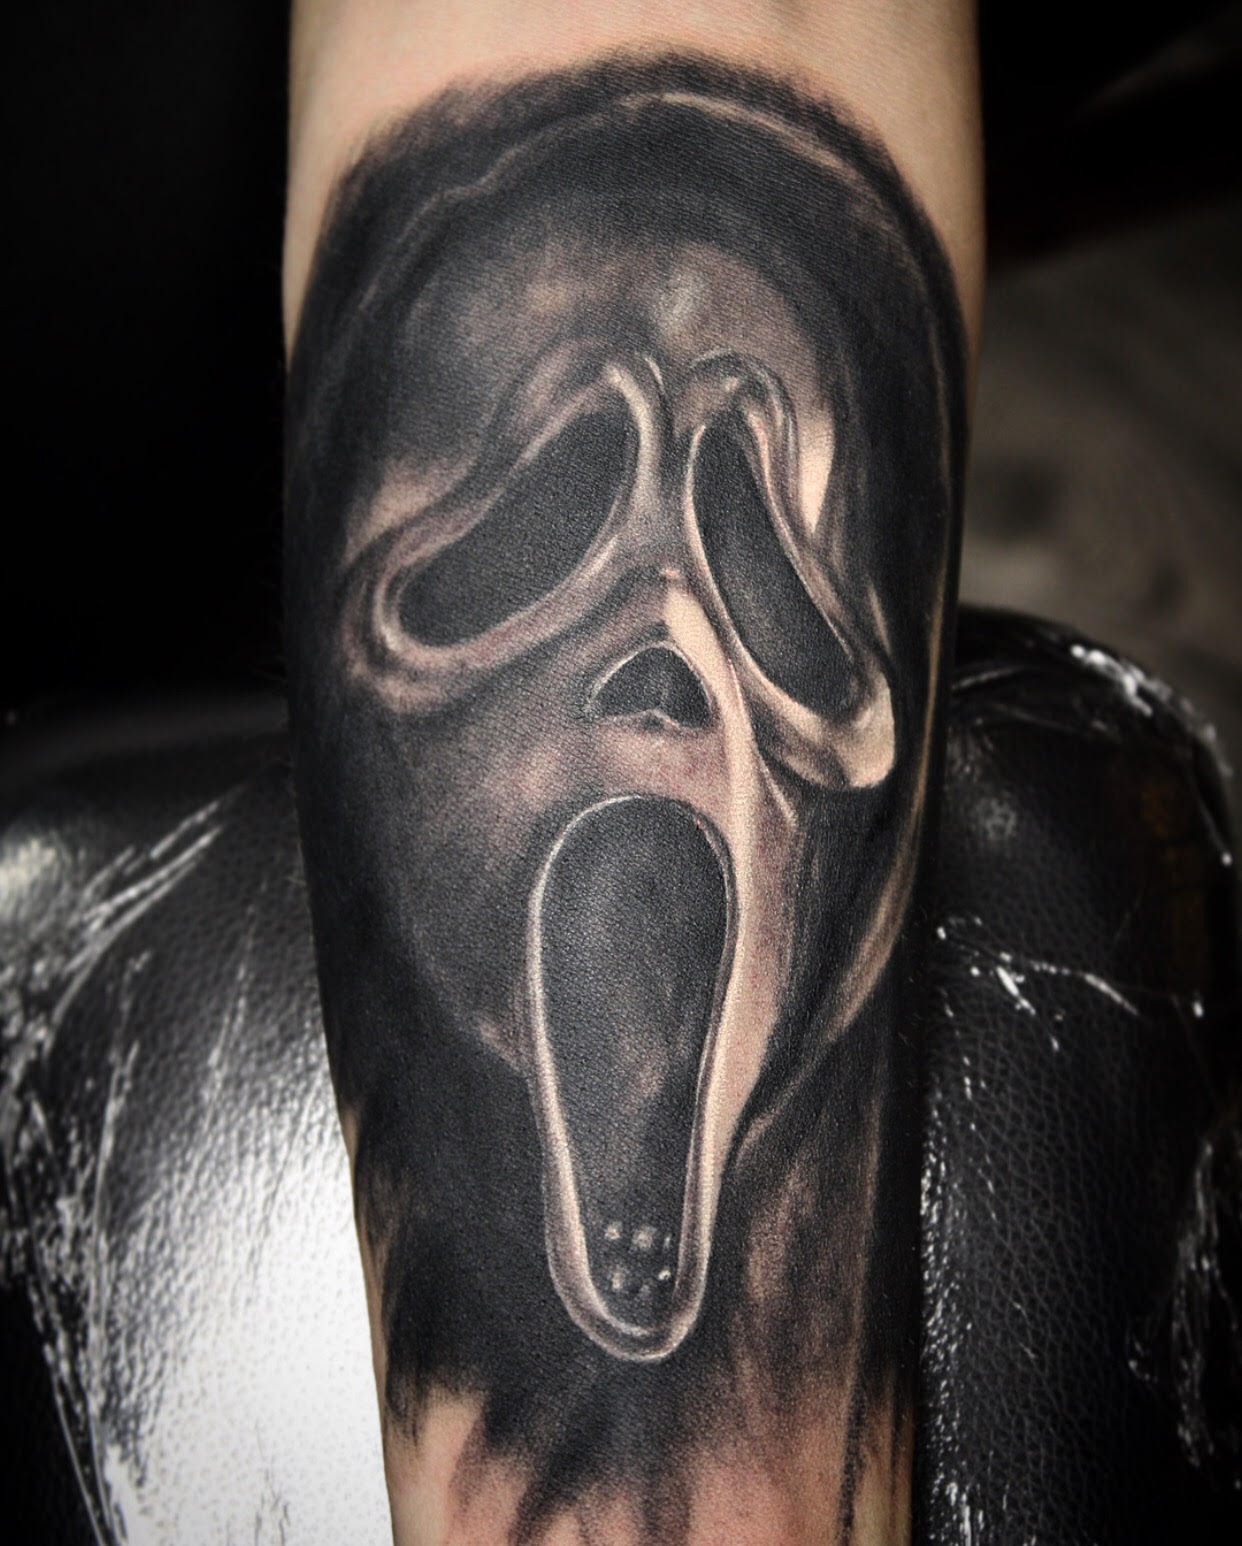 scream face all faces 2 by 2FaceTattoo on DeviantArt